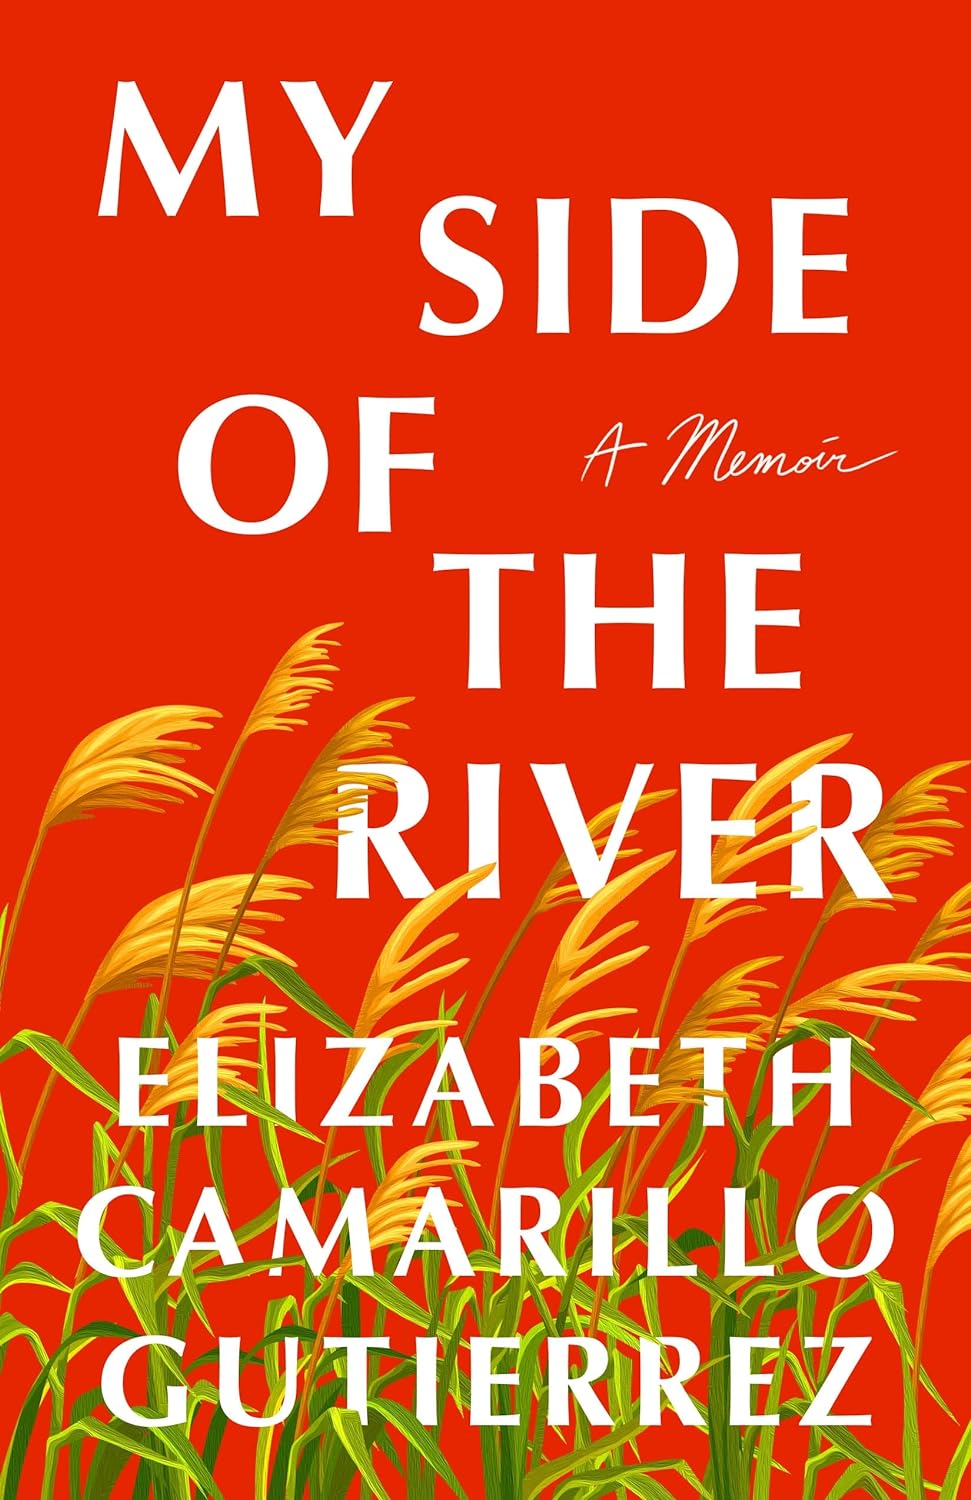 My Side of the River: A Memoir Hardcover